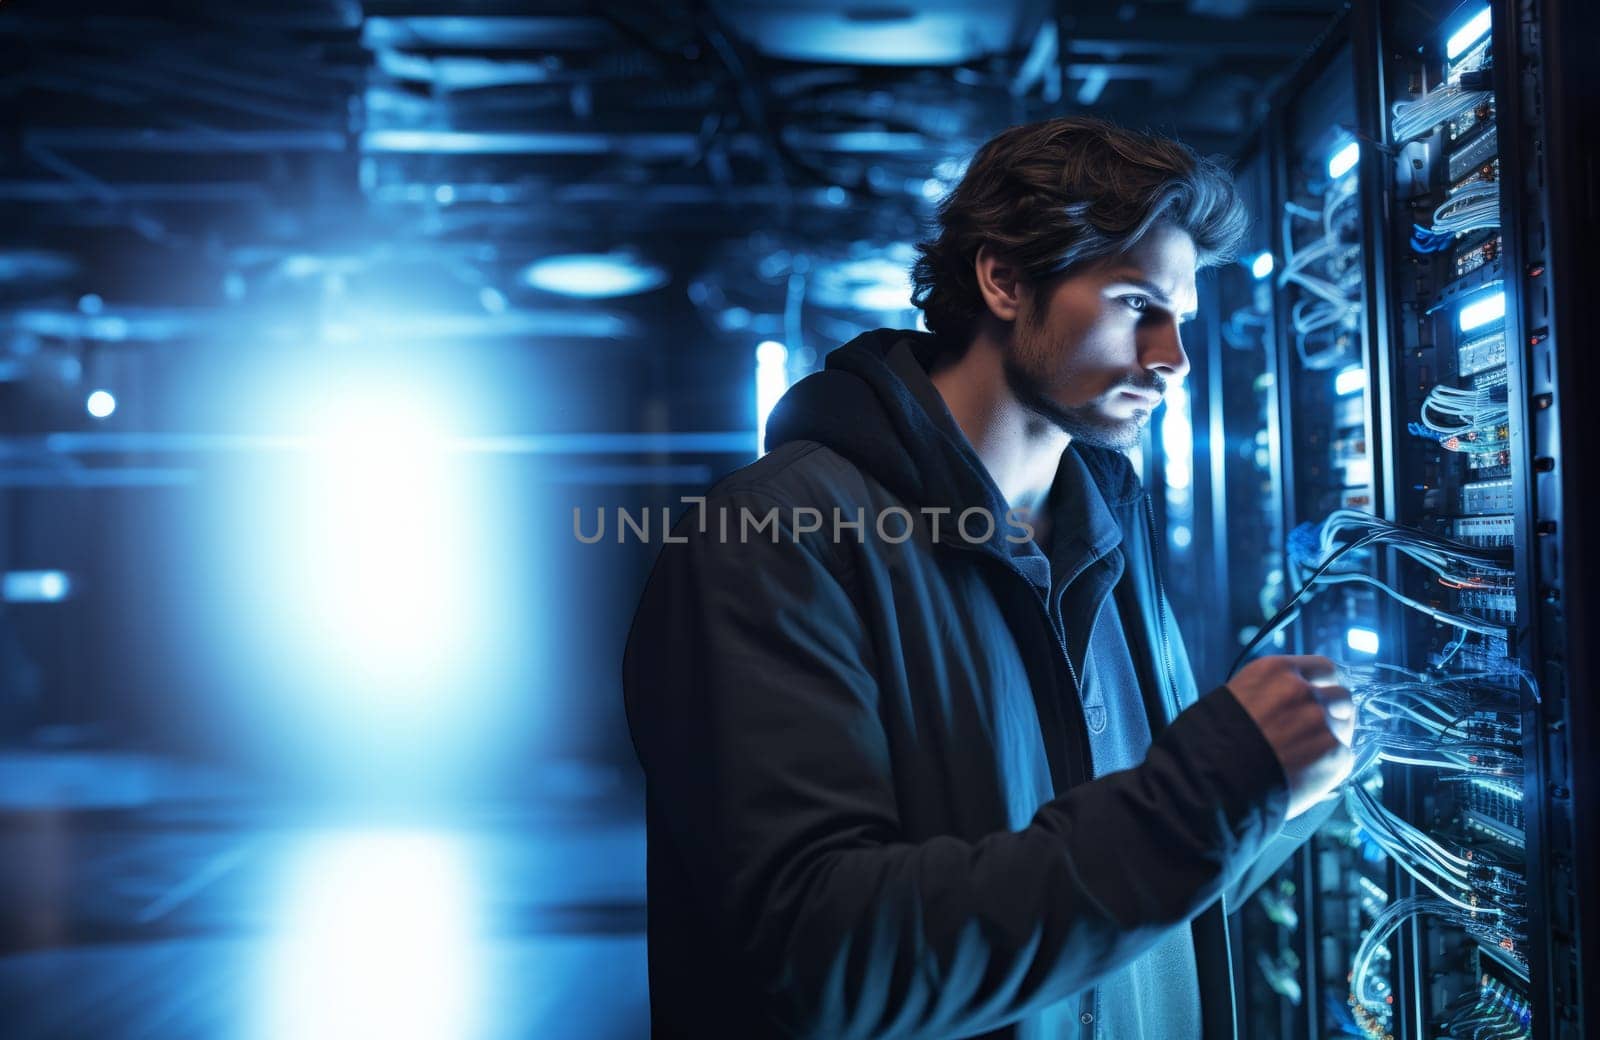 A technician walks through a blue server room, checking on the status of the servers.Generated image by dotshock